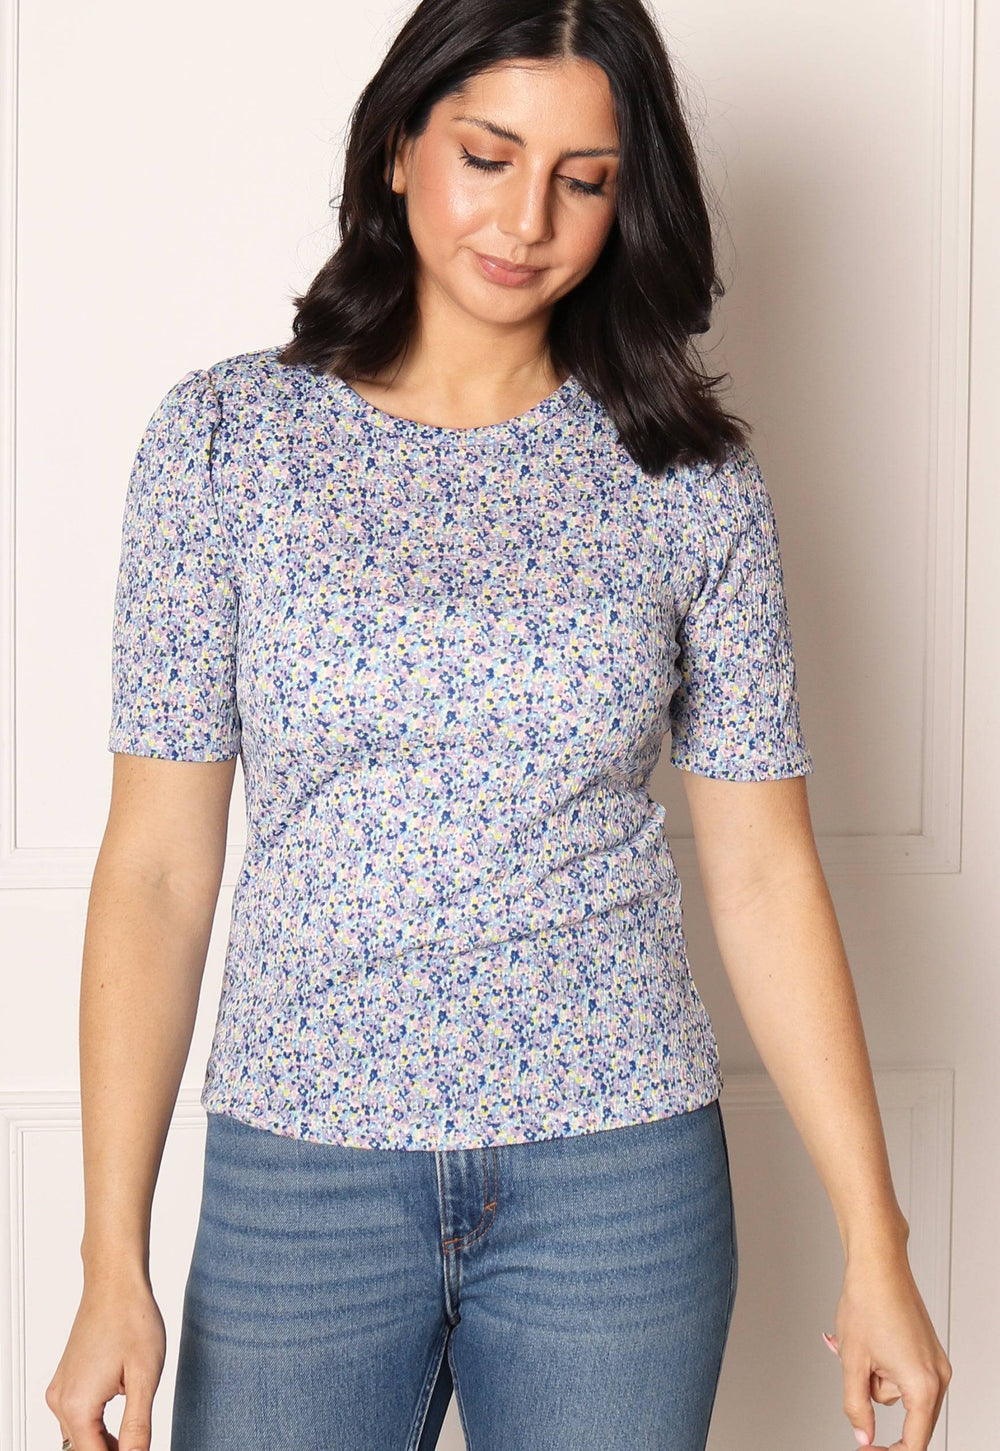 ONLY Pella Ditsy Floral Short Sleeve Top in Blue Tones - One Nation Clothing